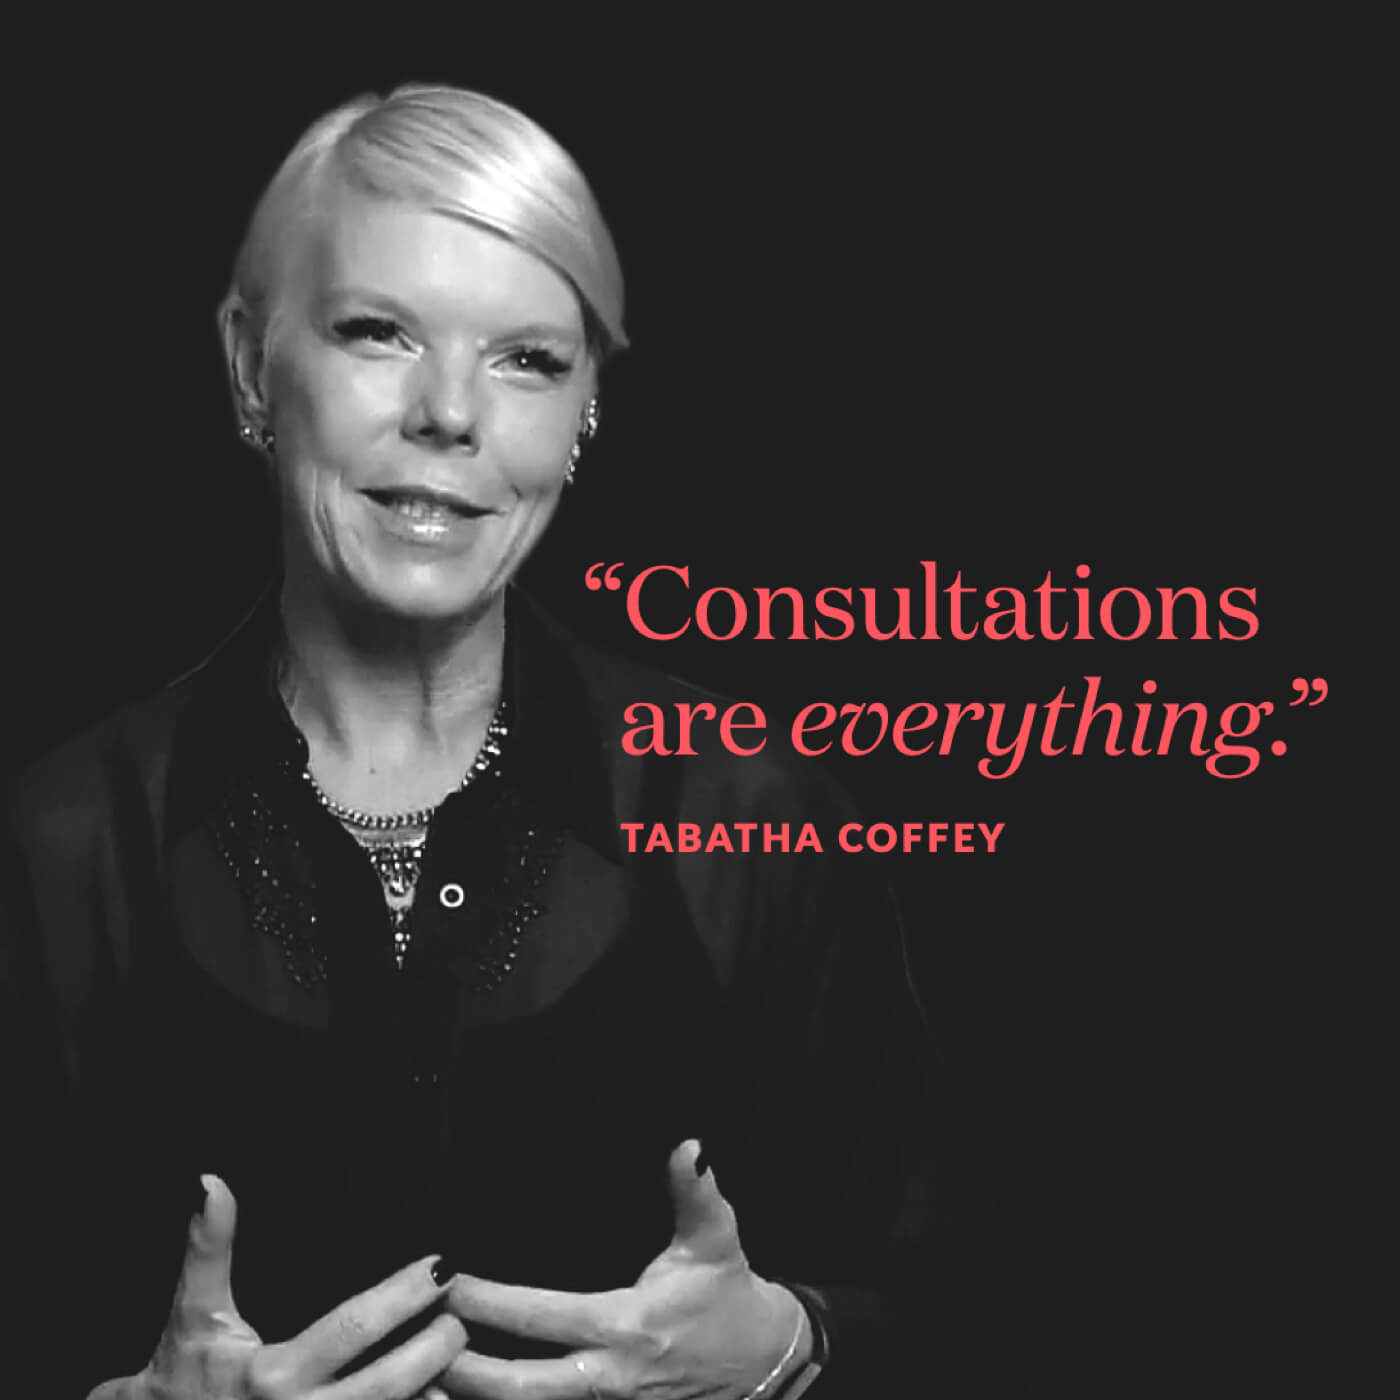 Tabatha Coffey quote - Consultations are everything